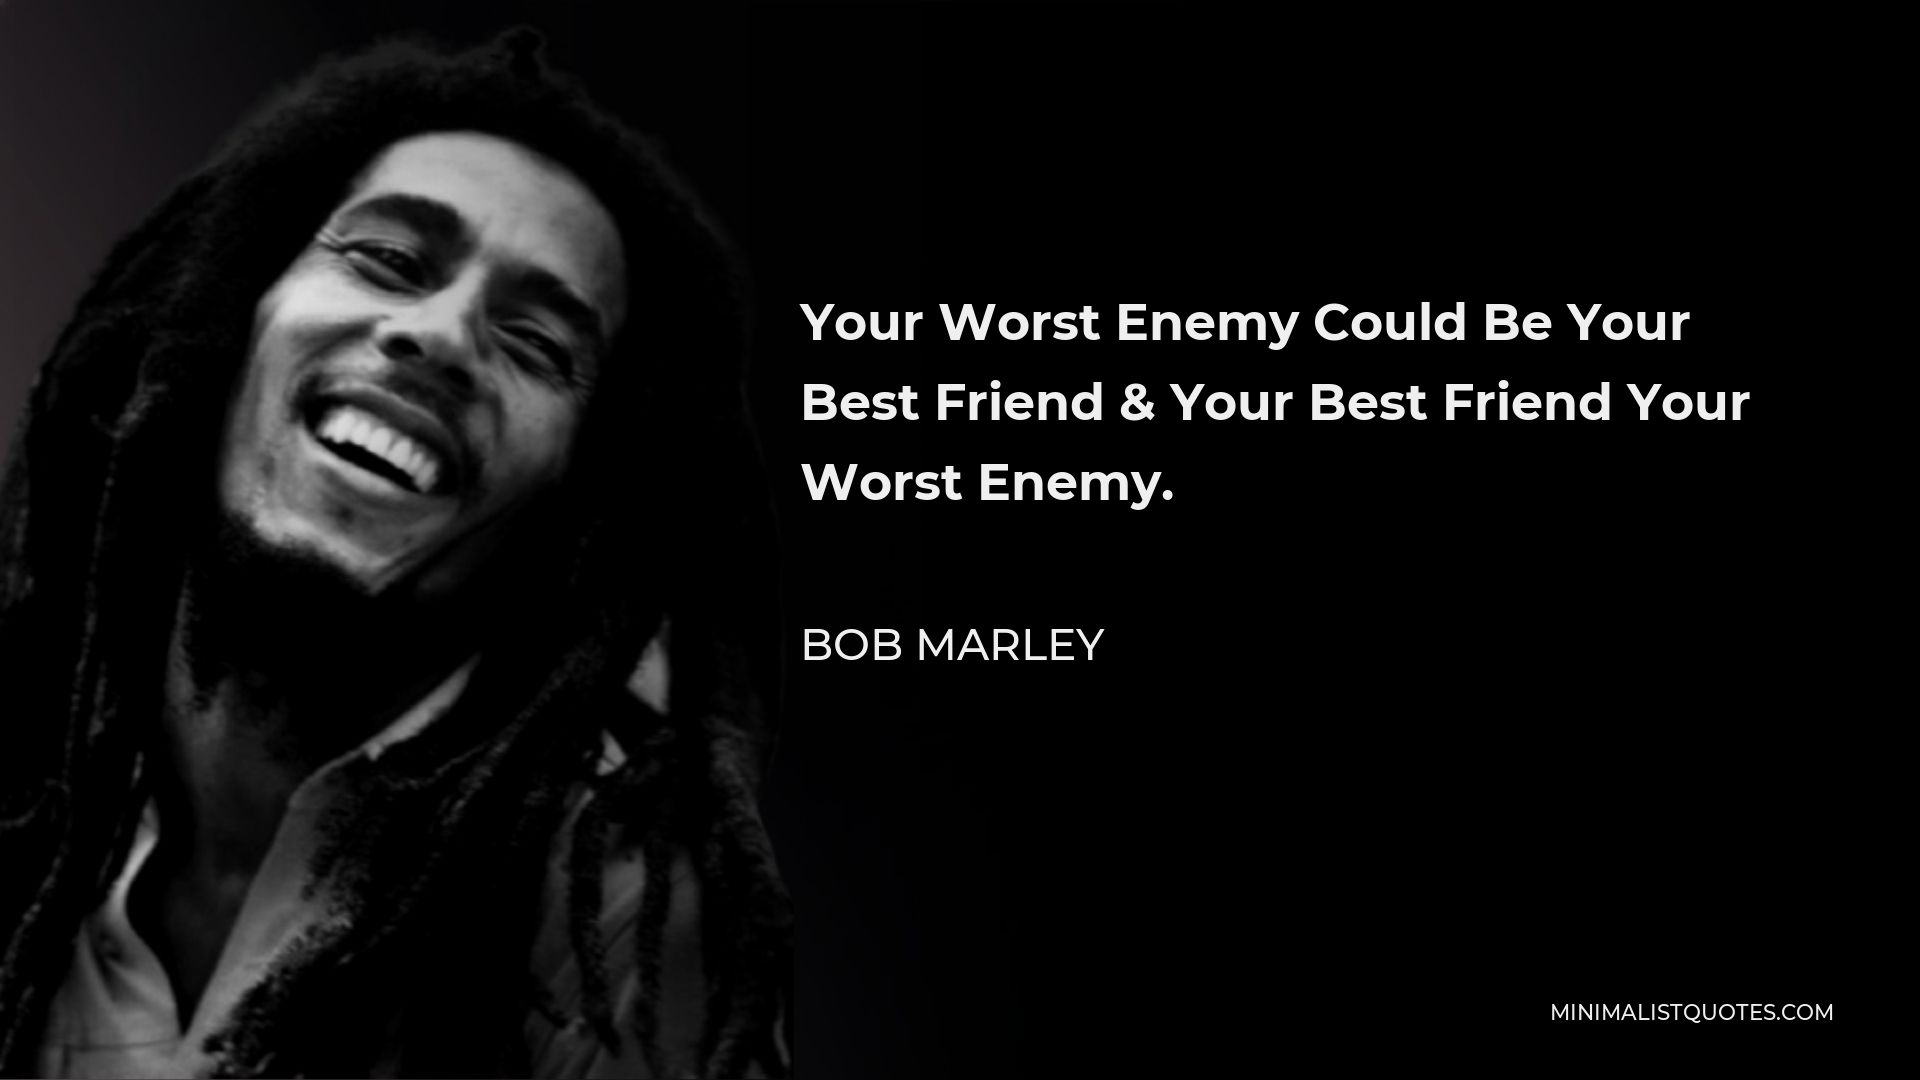 Bob Marley Quote - Your Worst Enemy Could Be Your Best Friend & Your Best Friend Your Worst Enemy.